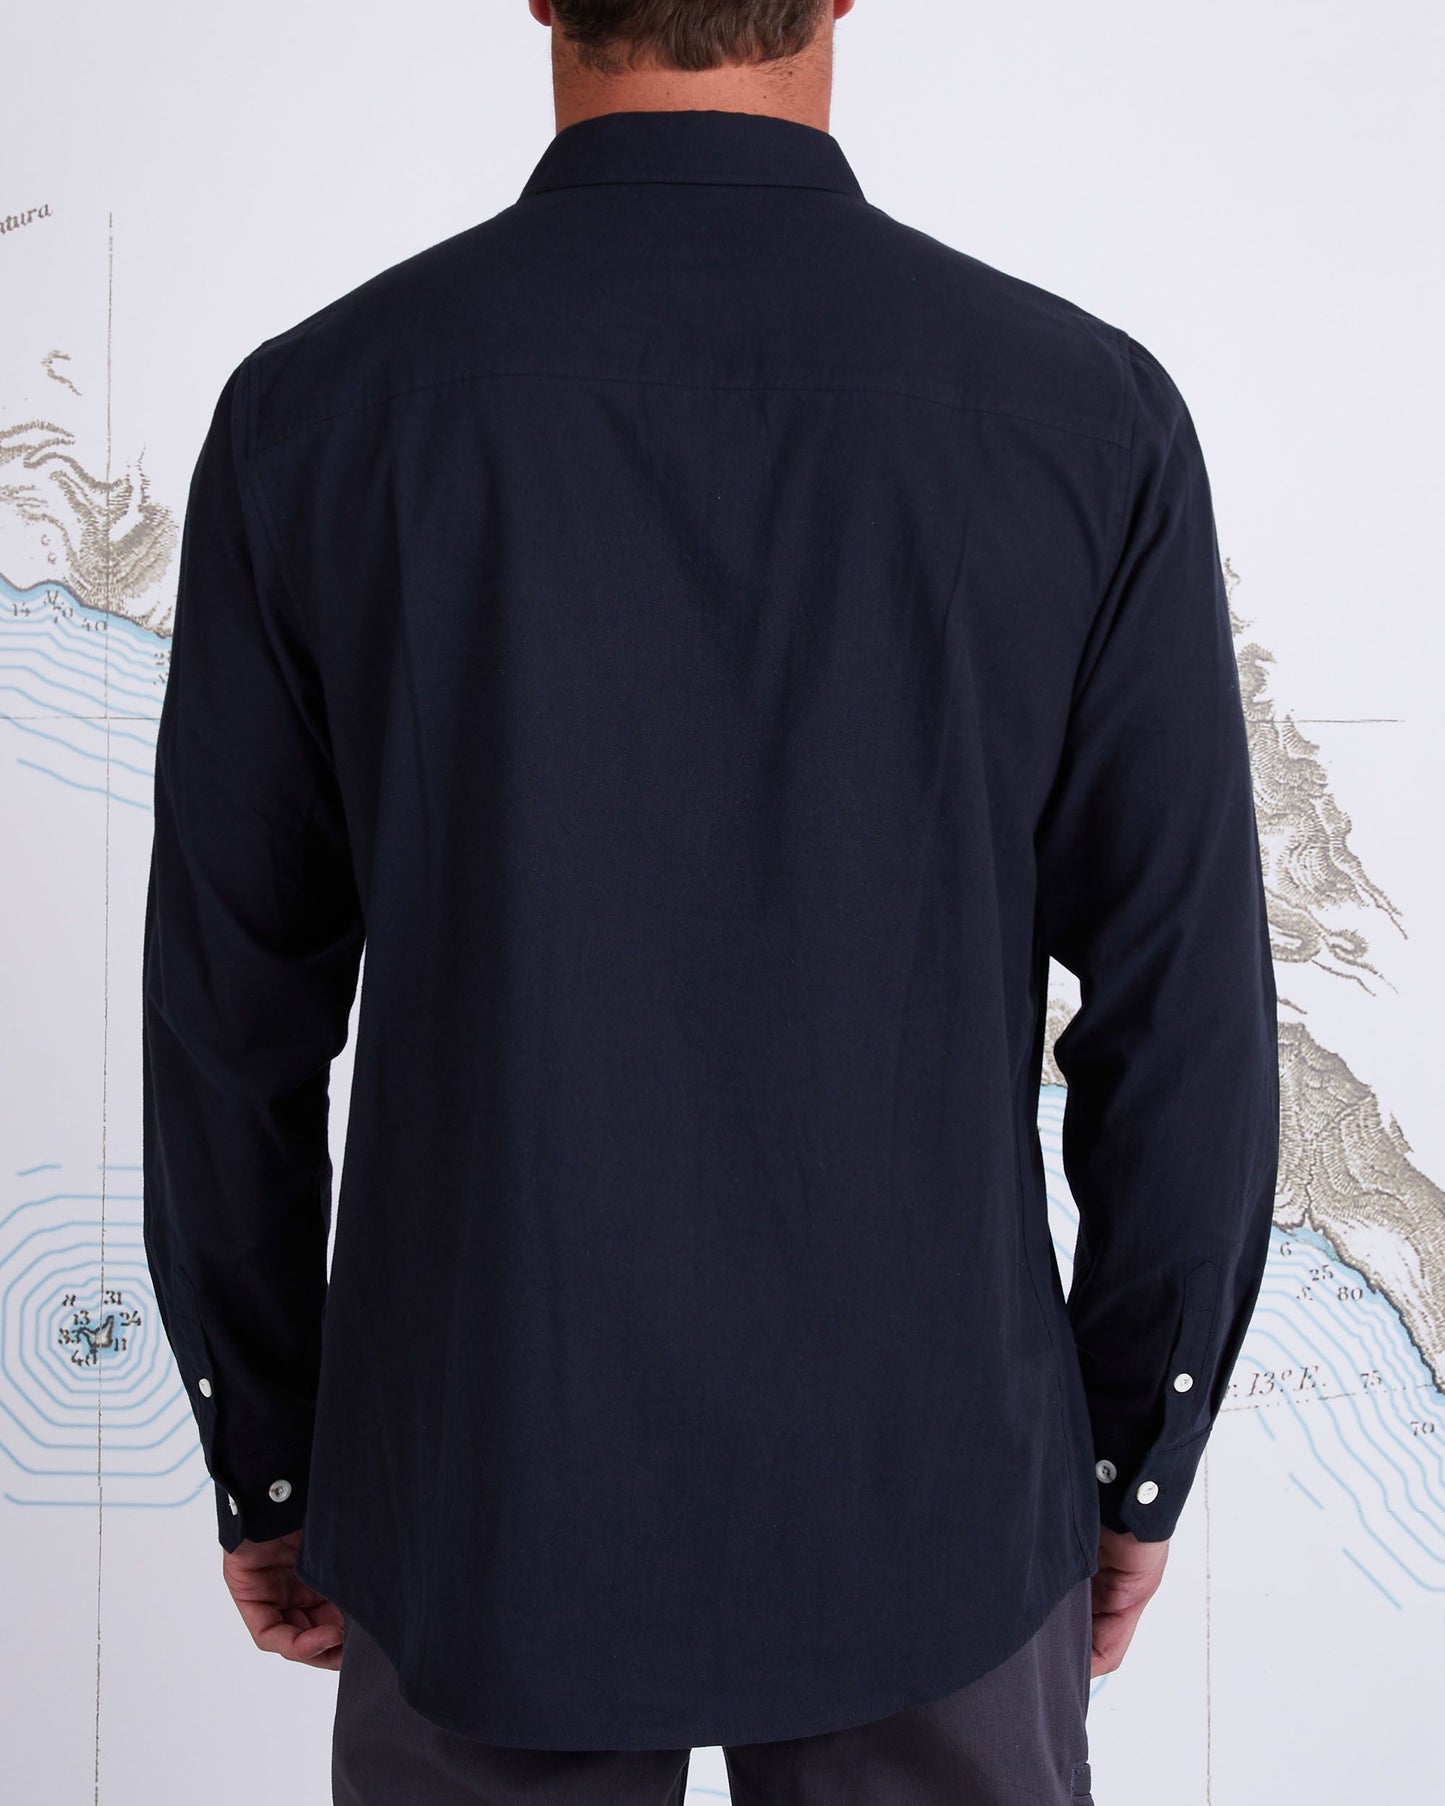 On body back of CORTES L/S WOVEN black